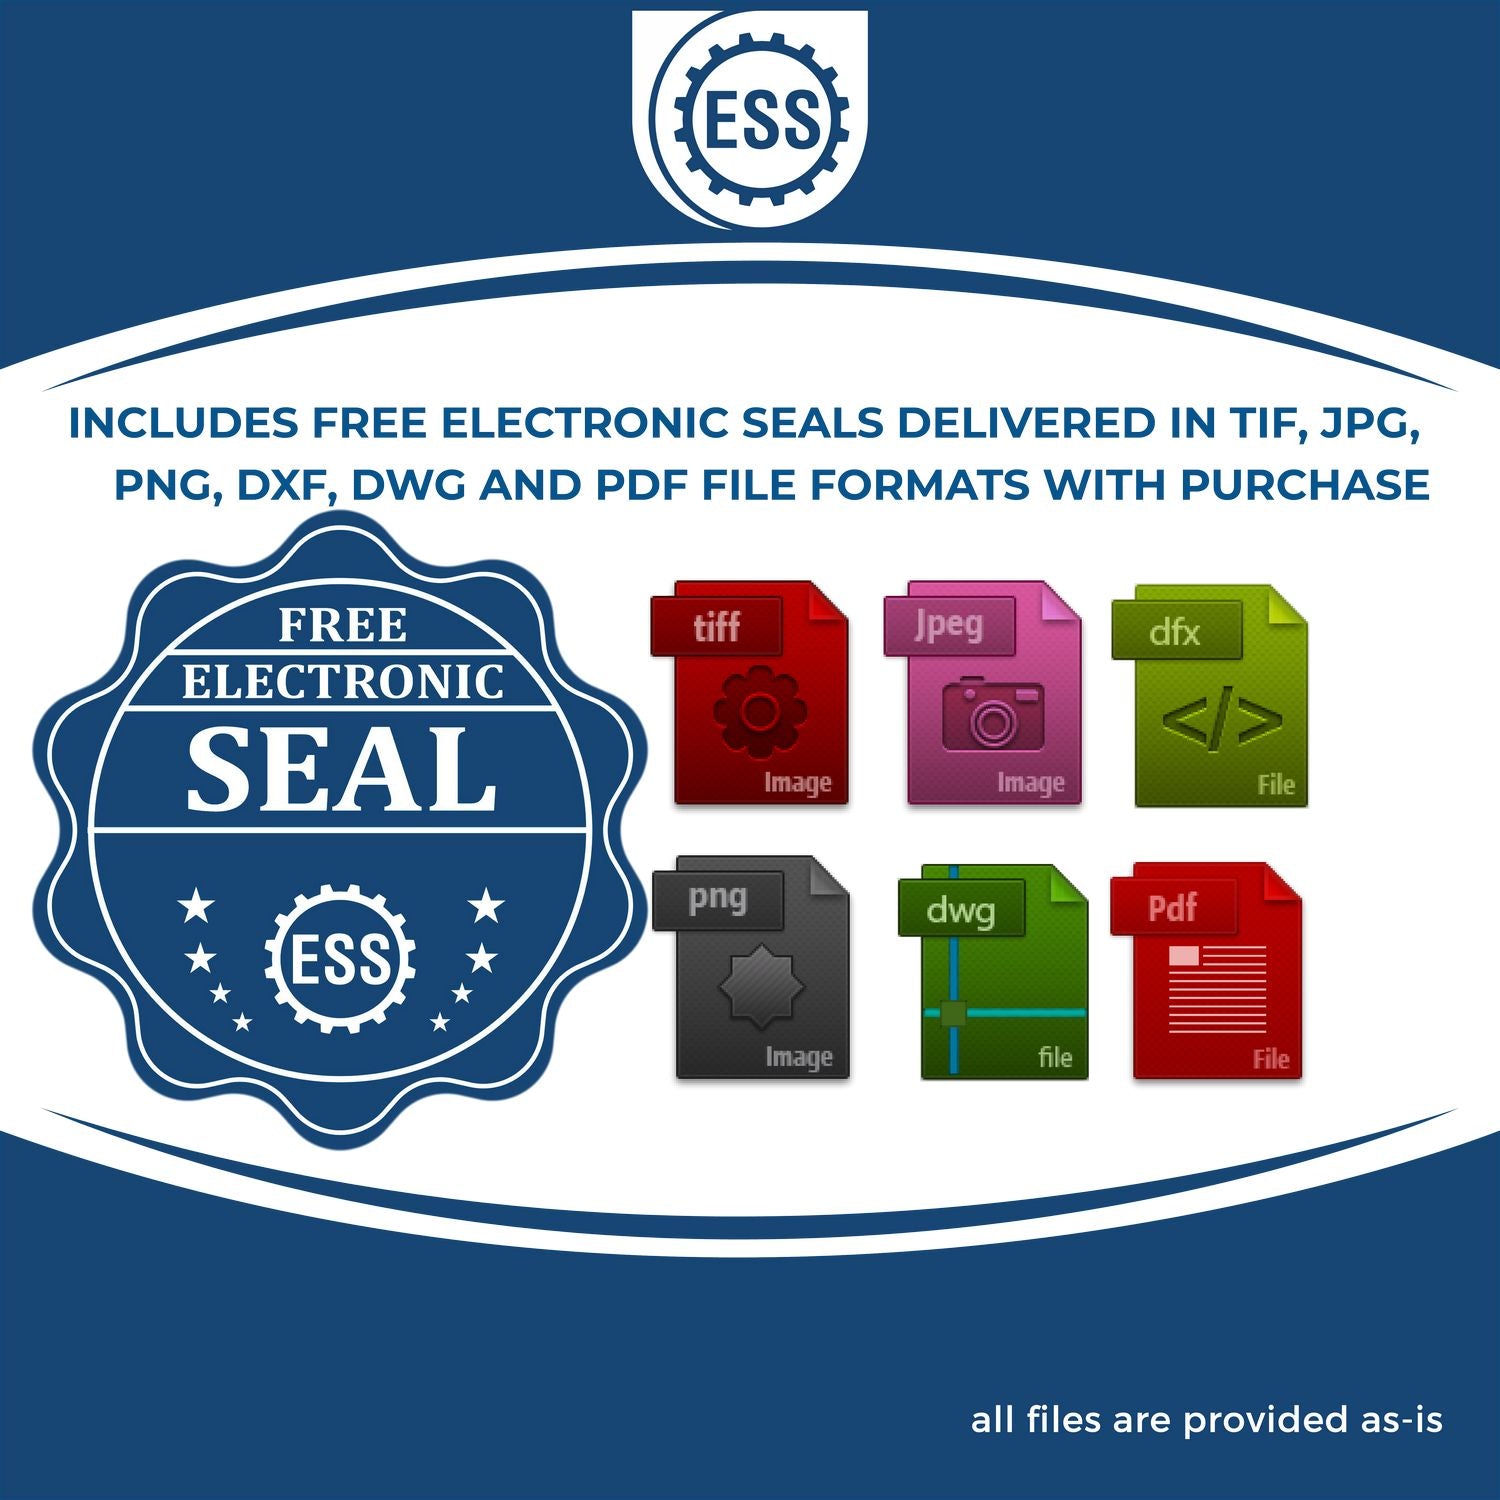 An infographic for the free electronic seal for the Handheld Tennessee Land Surveyor Seal illustrating the different file type icons such as DXF, DWG, TIF, JPG and PNG.